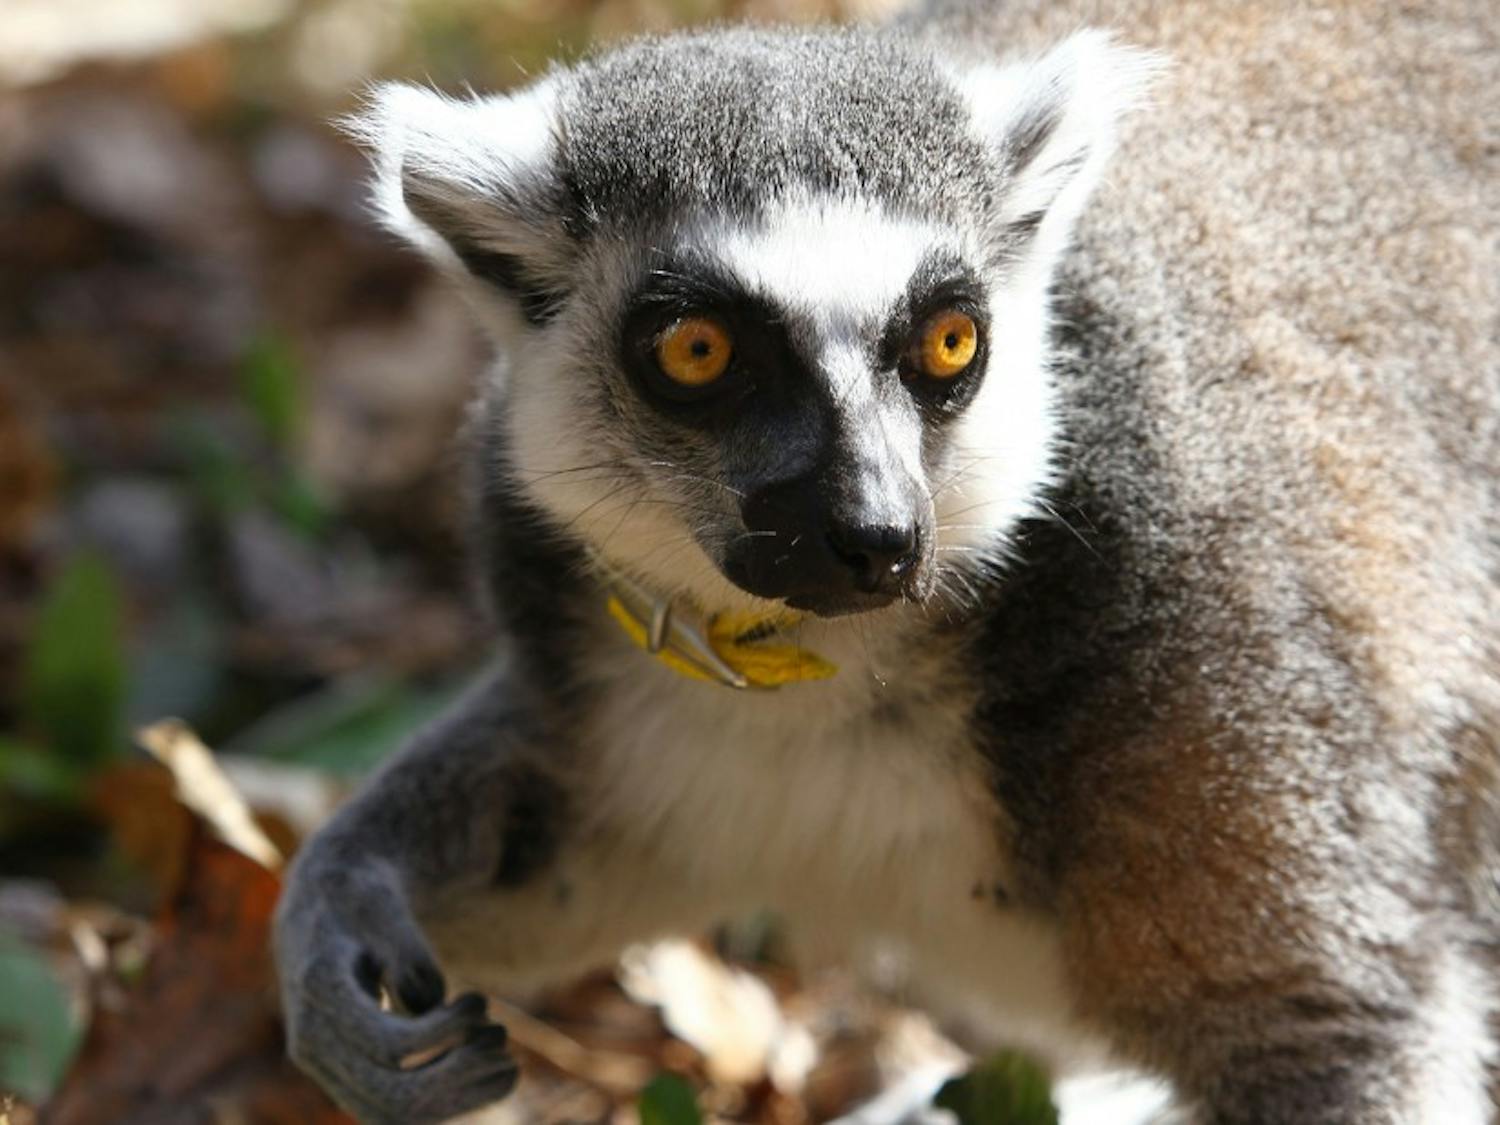 Duke Lemur Center will hold its Lemurpalooza a celebration and educational event, where visitors can sign up to sponsor individual lemurs.